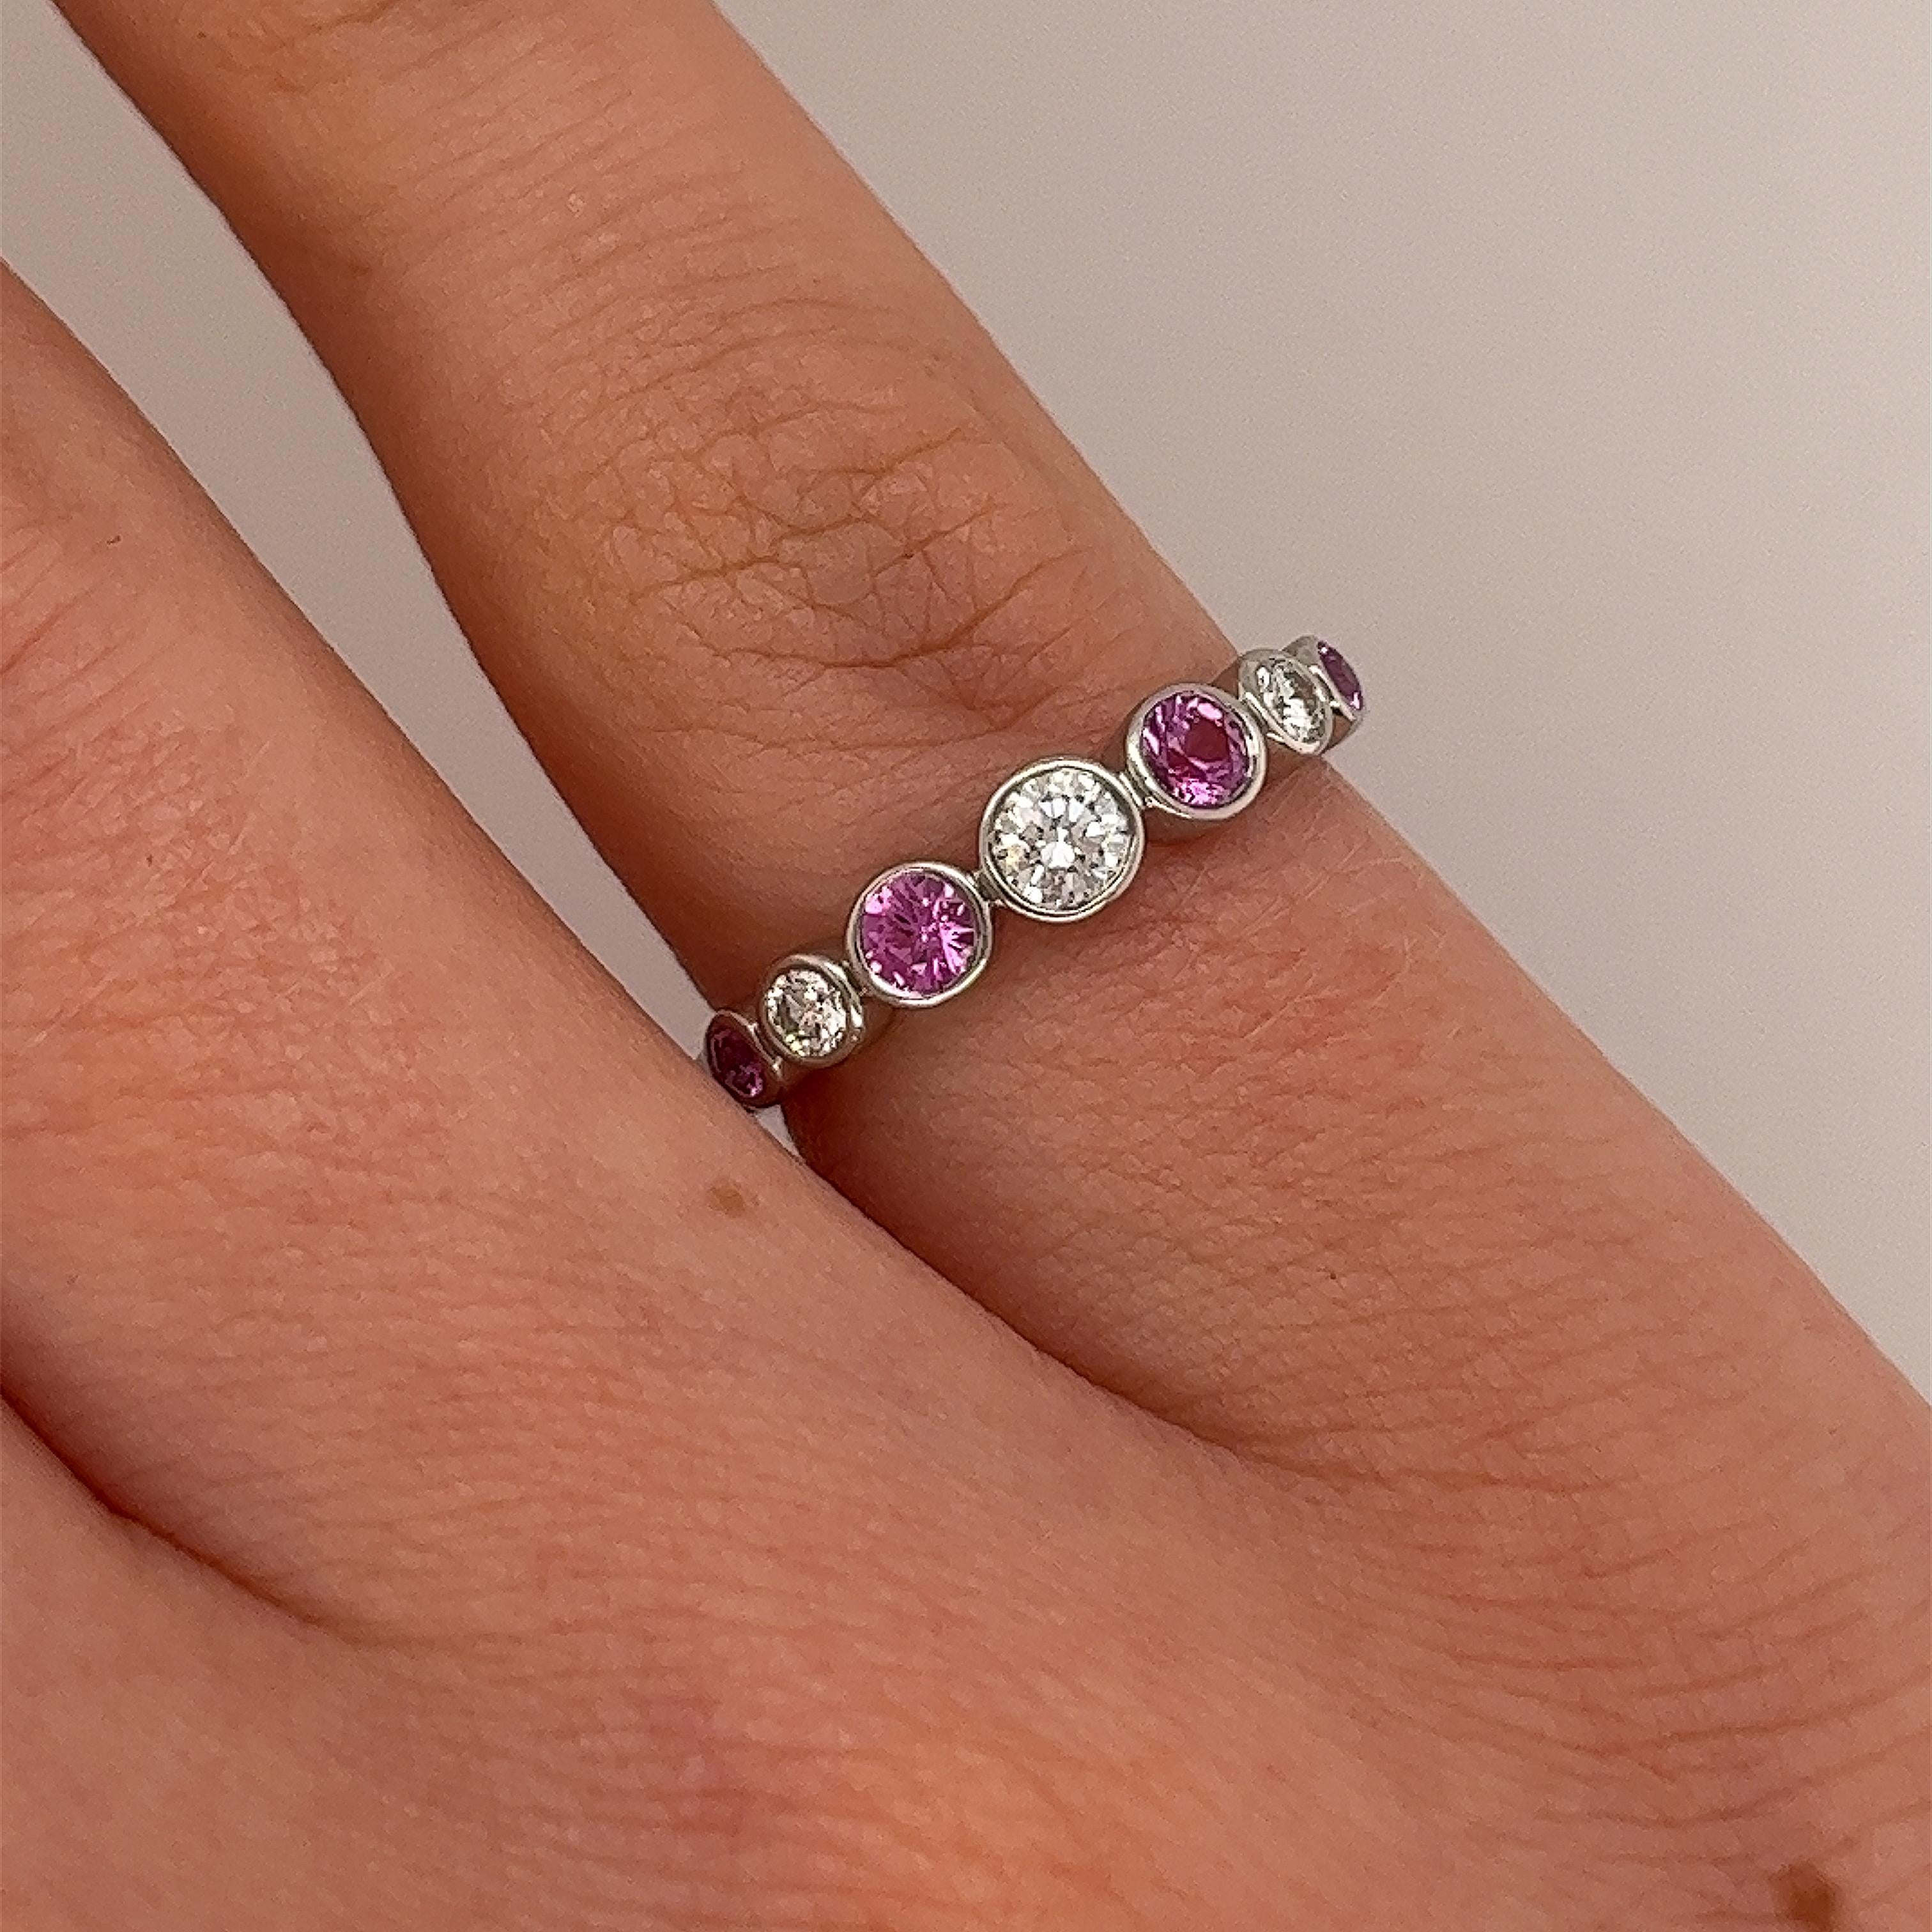 Tiffany & Co. Jazz ring set with 3 Diamonds &4 Pink Sapphires in a graduated set For Sale 3